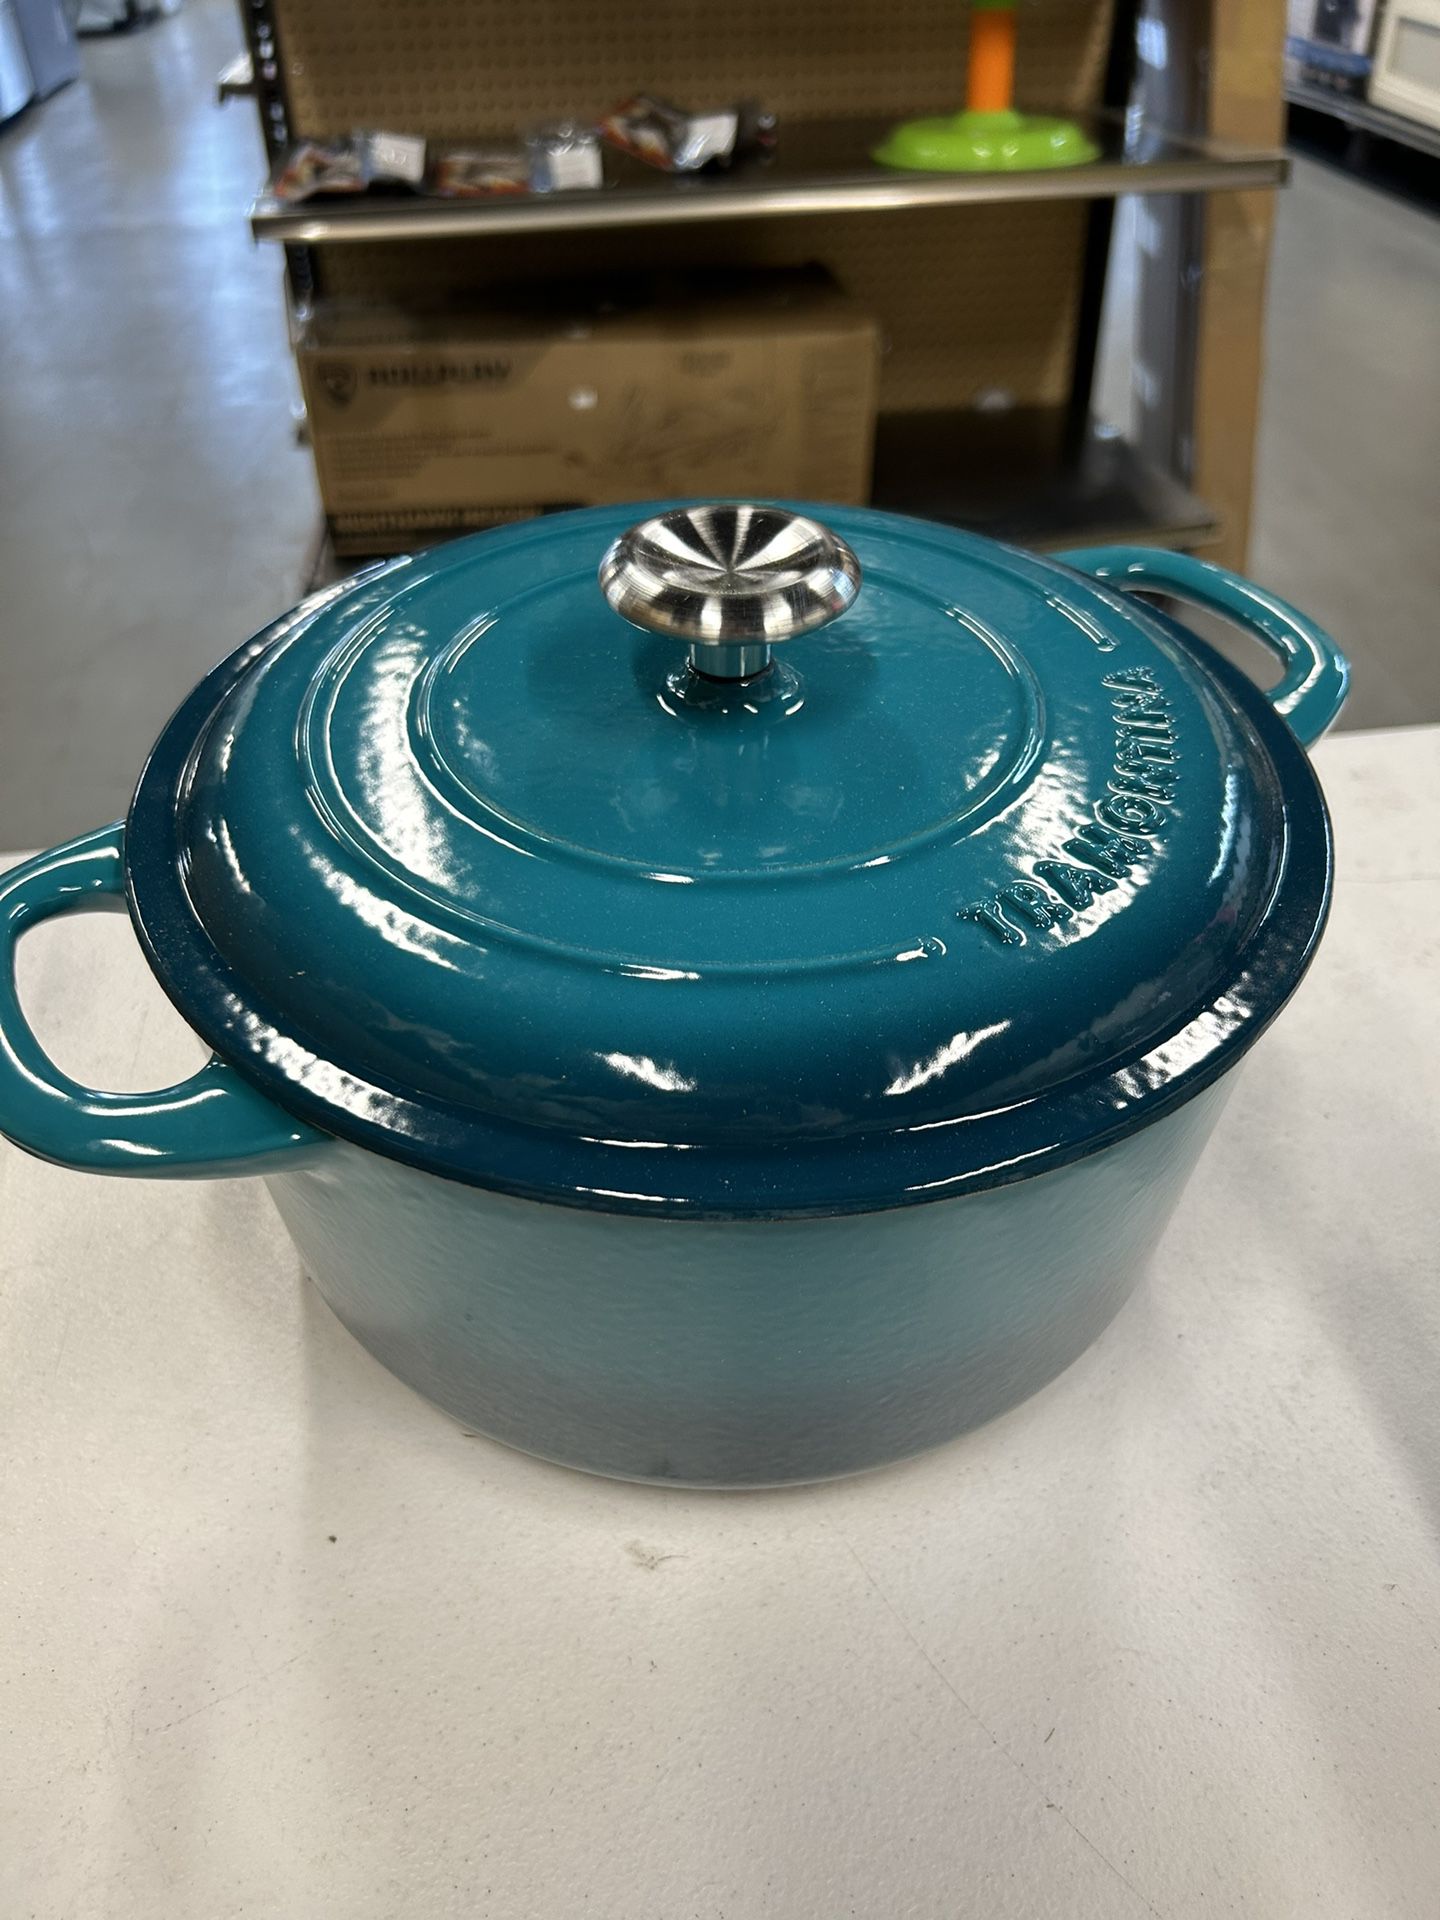 Tramontina Enameled Cast Iron Dutch Ovens 3.5 QT and 5.5 QT ️New Item ️Red  Or Green (Stores Costco/Walmart Retail $70-$130 ) Big Saving Deal️$45 for  Sale in Bell Gardens, CA - OfferUp